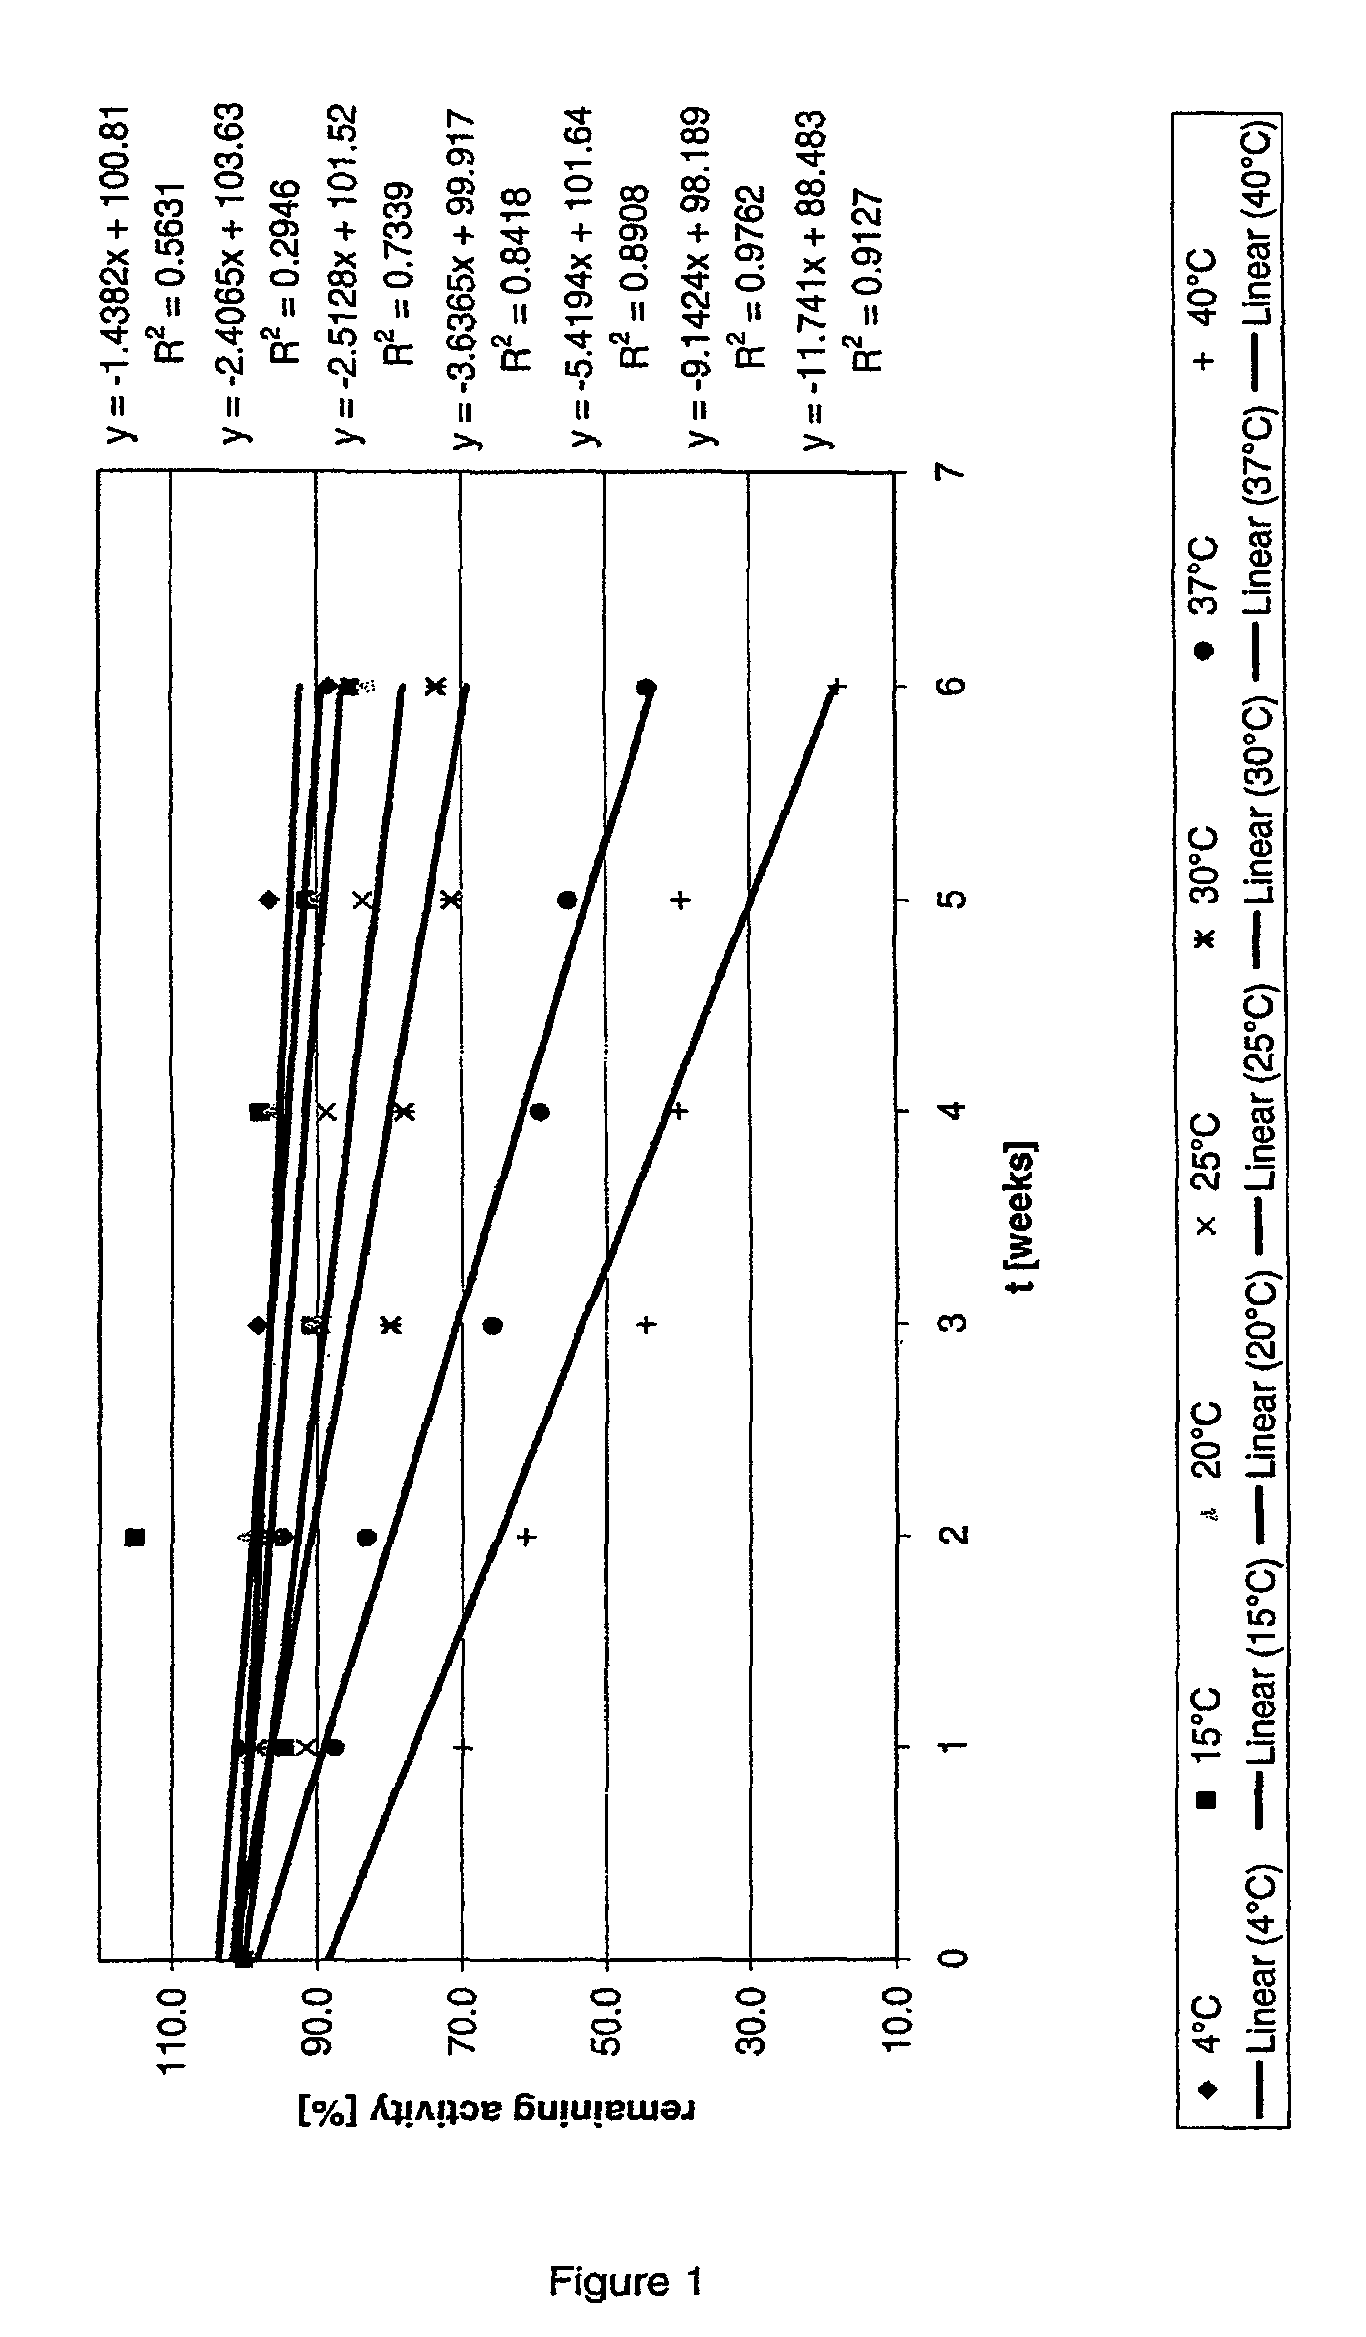 Methods for modeling protein stability